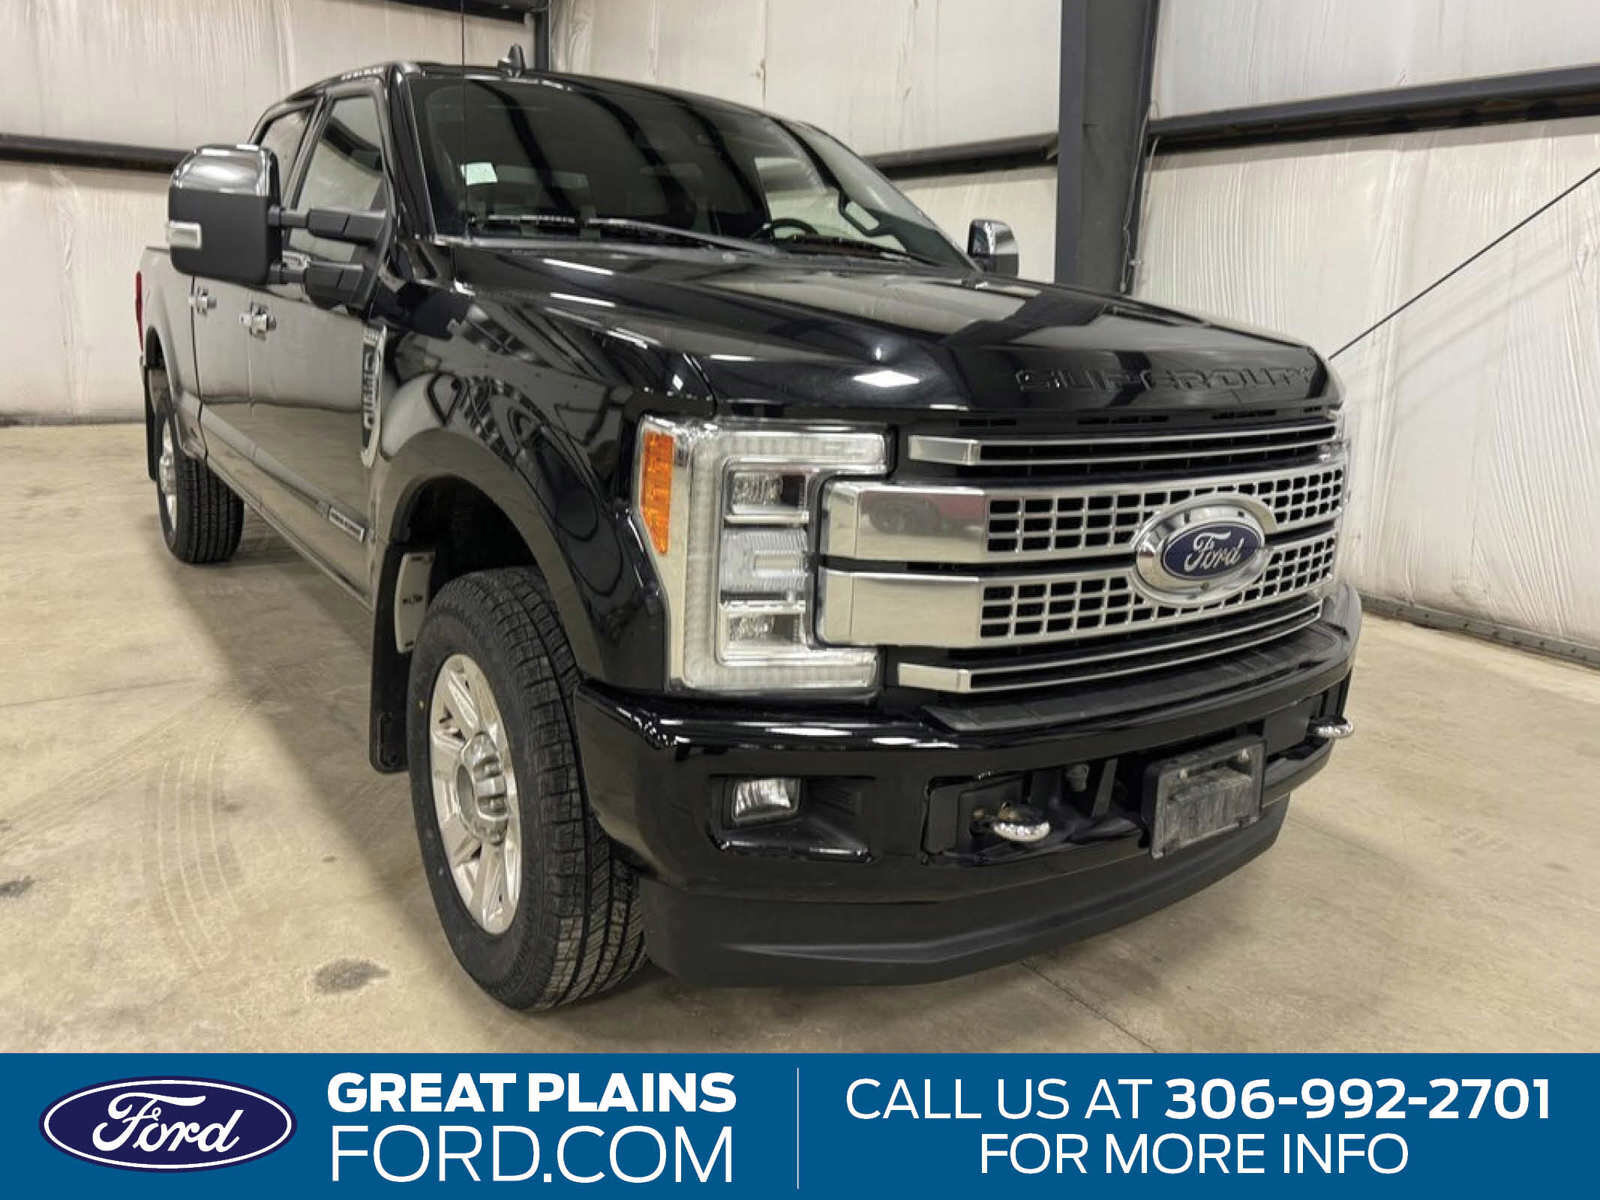 2019 Ford F-350 Platinum | 4x4 |  Heated & Cooled Leather Seats | 